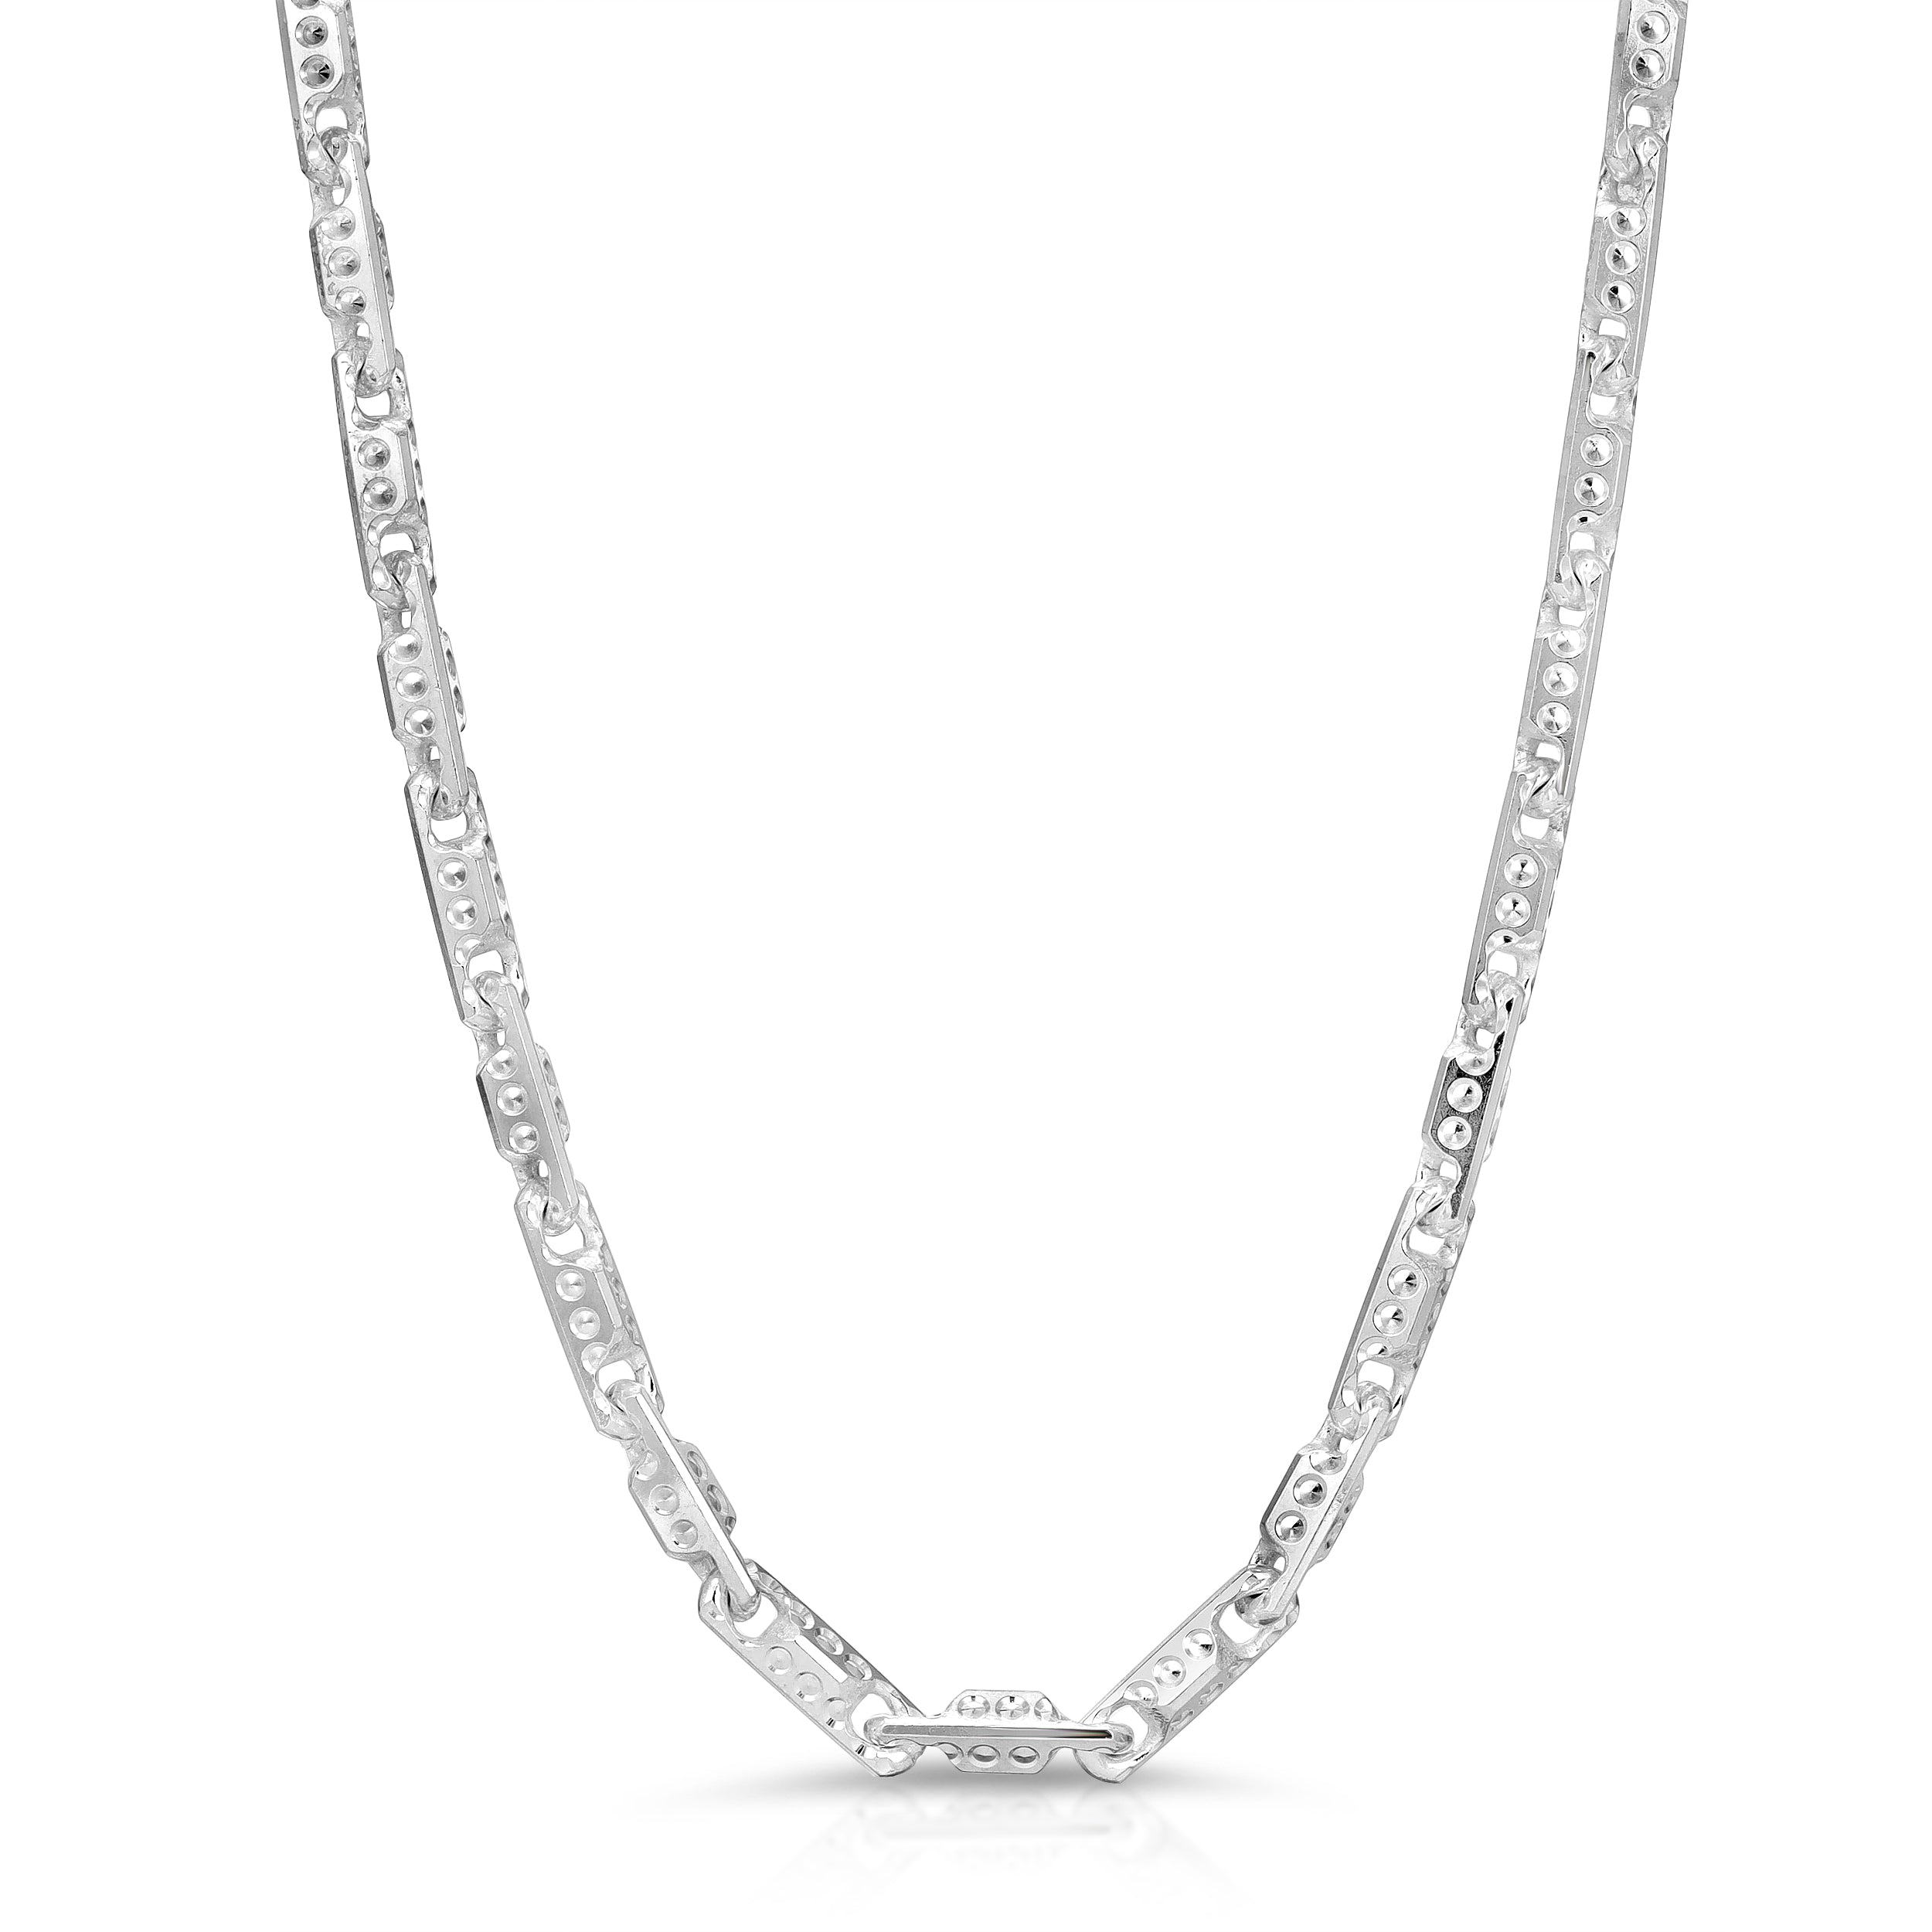 Sterling silver Heshe chain